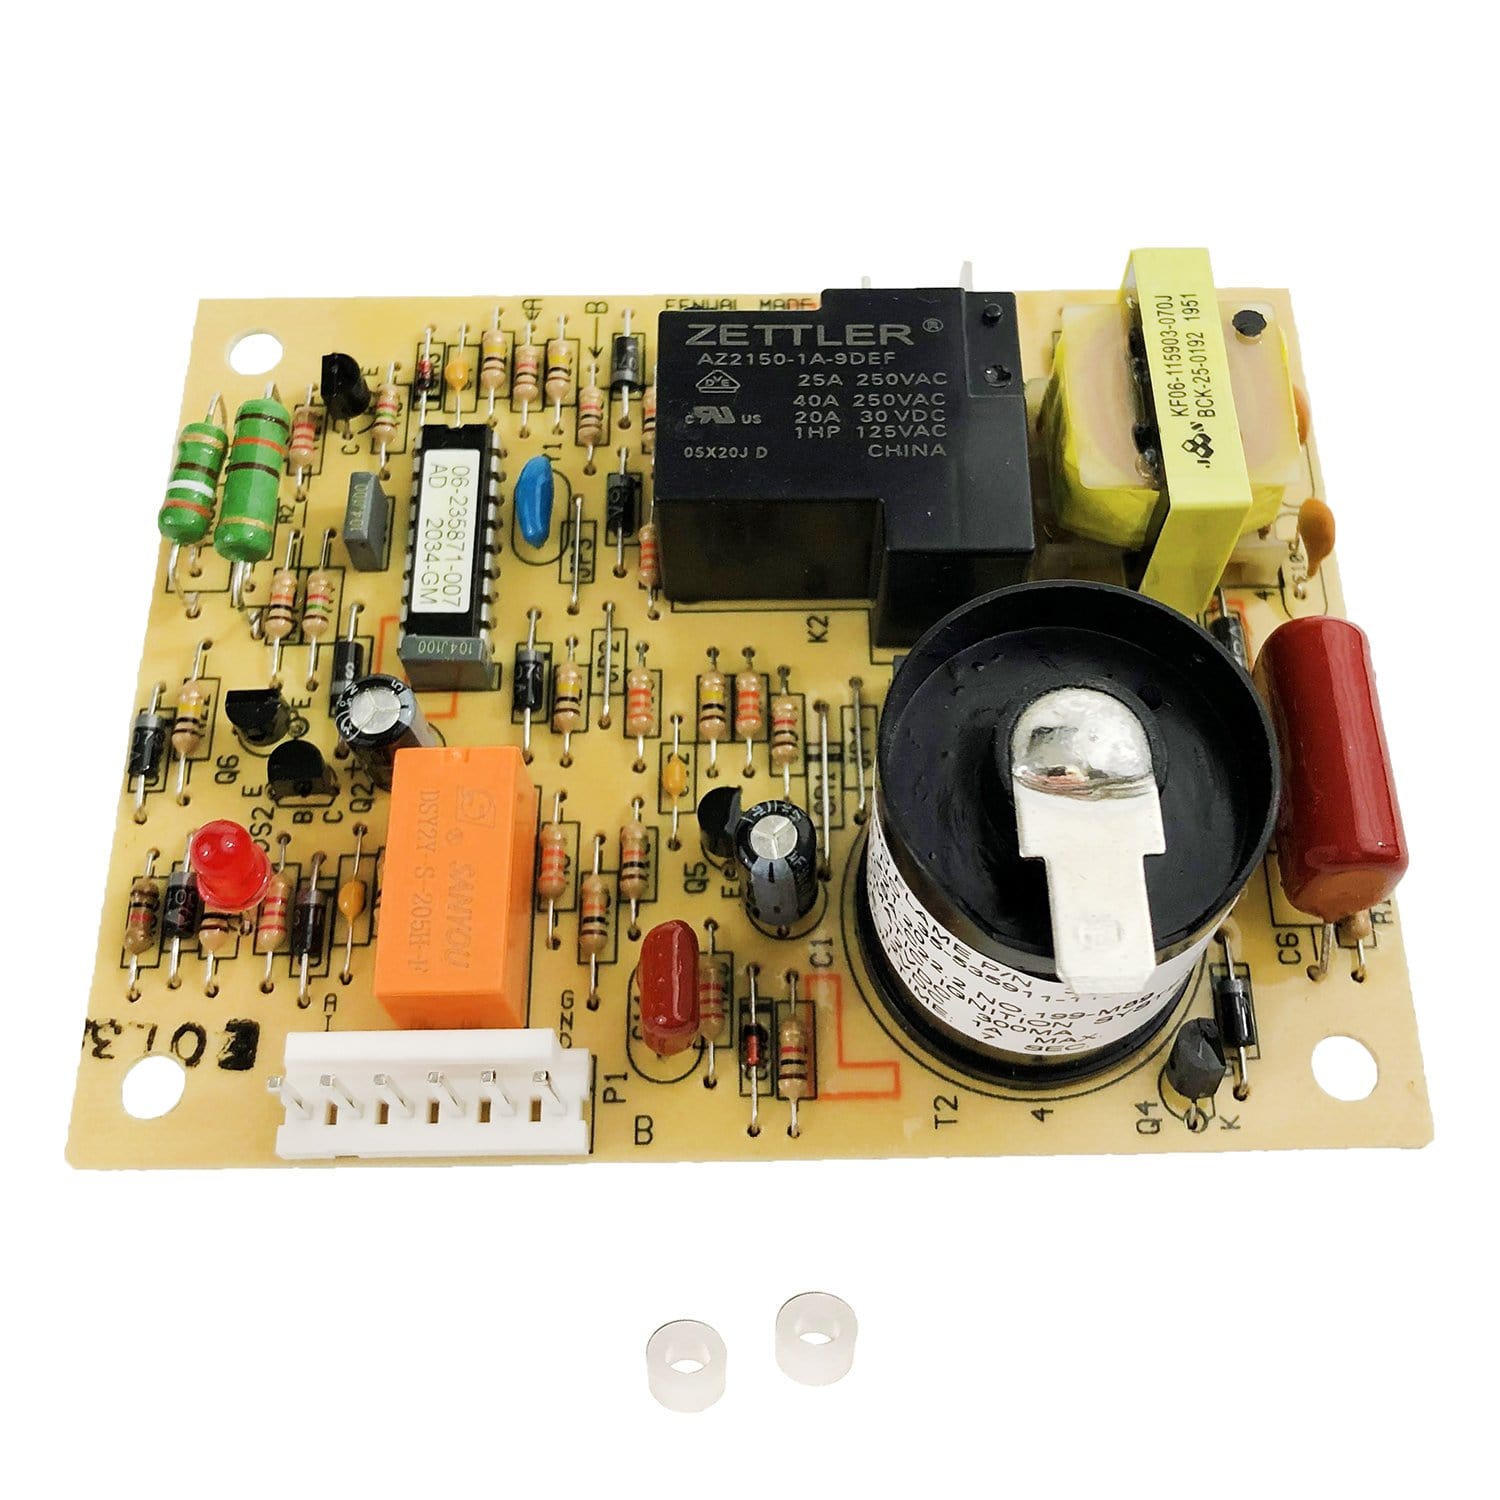 Atwood 31501 Ignition Board Kit For Atwood Furnaces